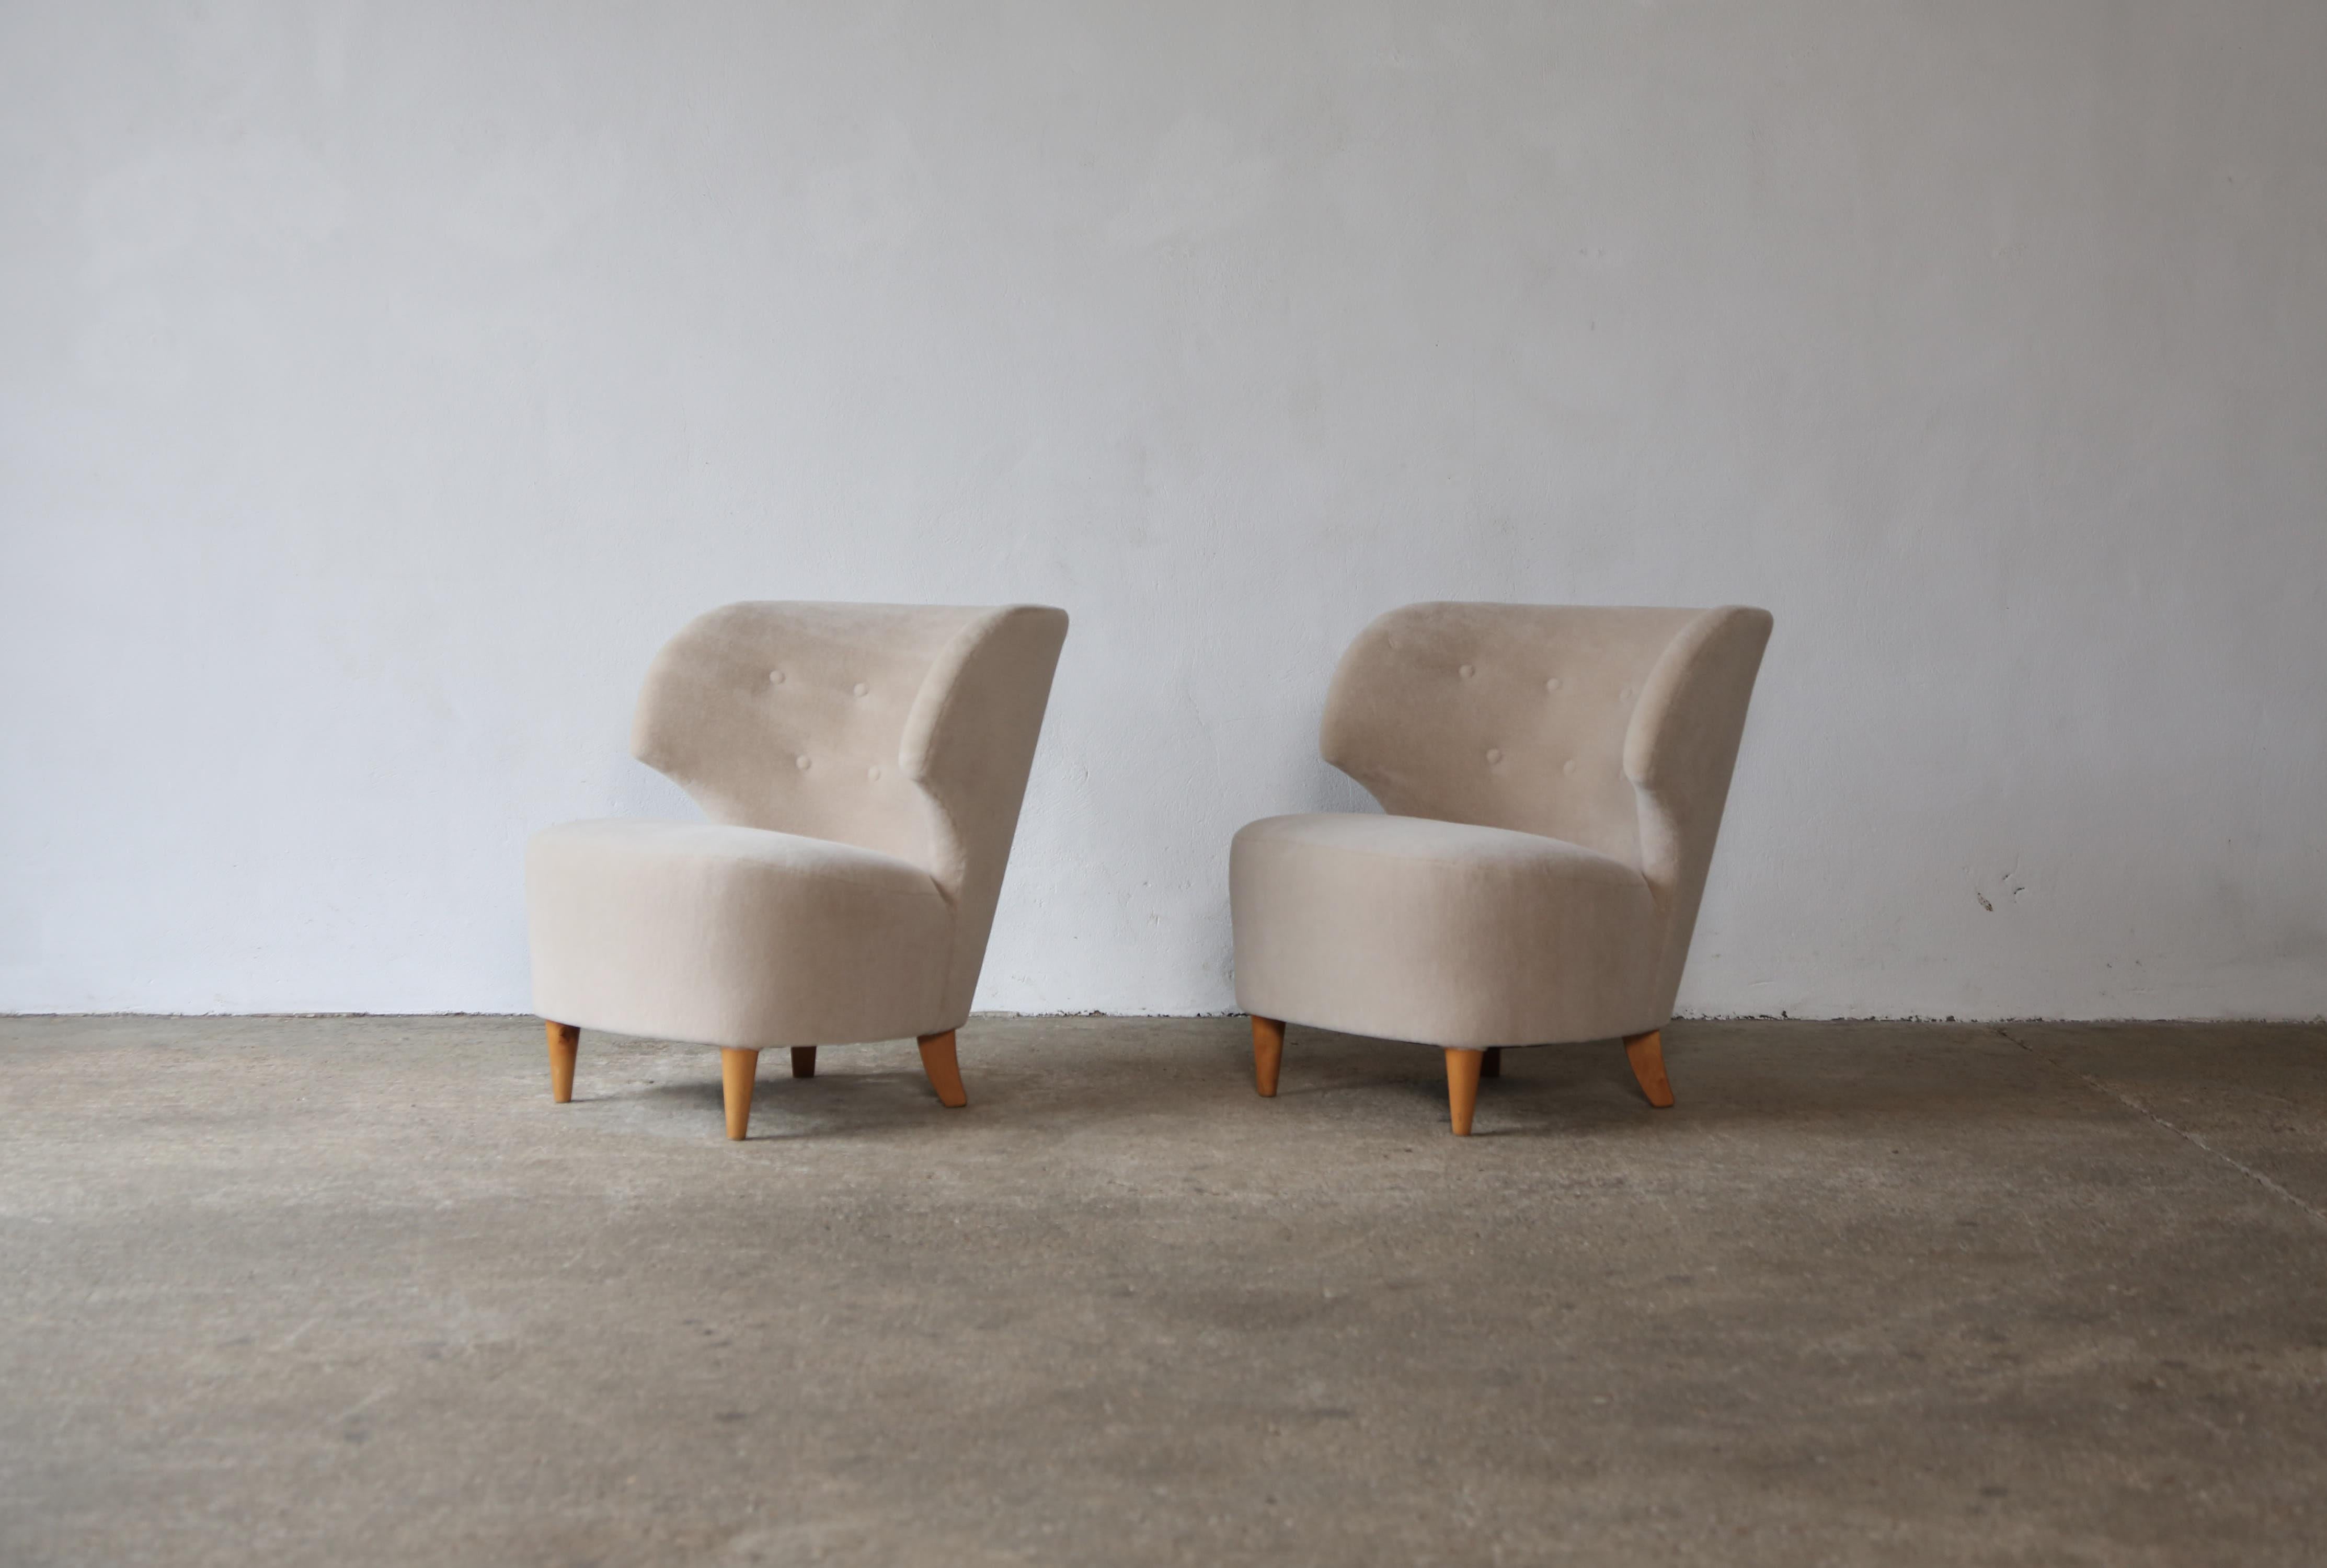 Pair of Carl-Johan Boman Chairs, Finland, 1940s, Newly Upholstered in Alpaca 3